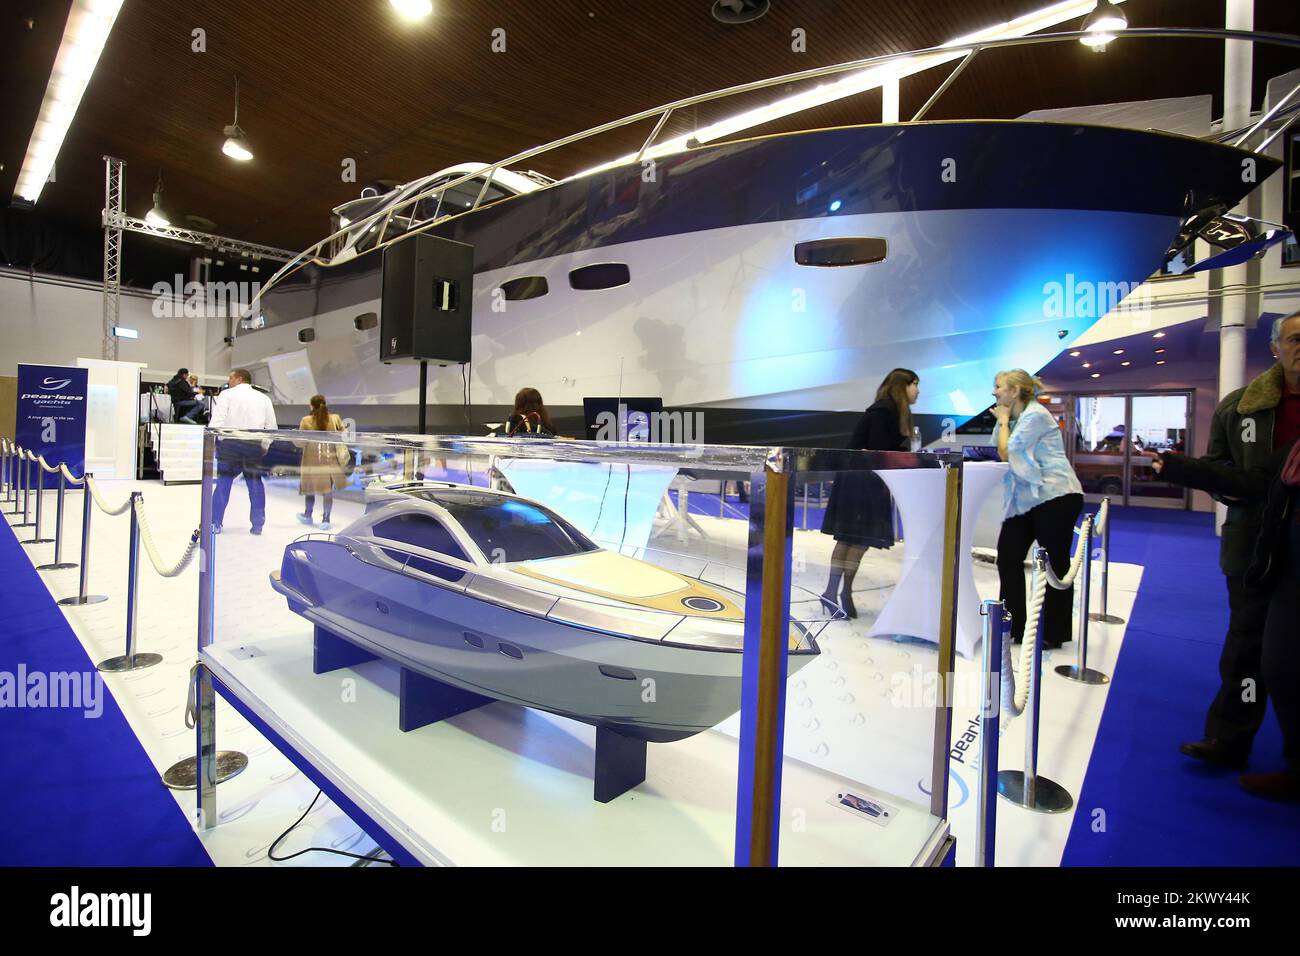 22.02.2017., Zagreb, Croatia - PearlSea 56 yach is the biggest yach at the 26th International Boat Show. The yach named Silver Shadow is 17 meters long and is powered with 2x600 HP Volvo engines. Photo: Slavko Midzor/PIXSELL Stock Photo